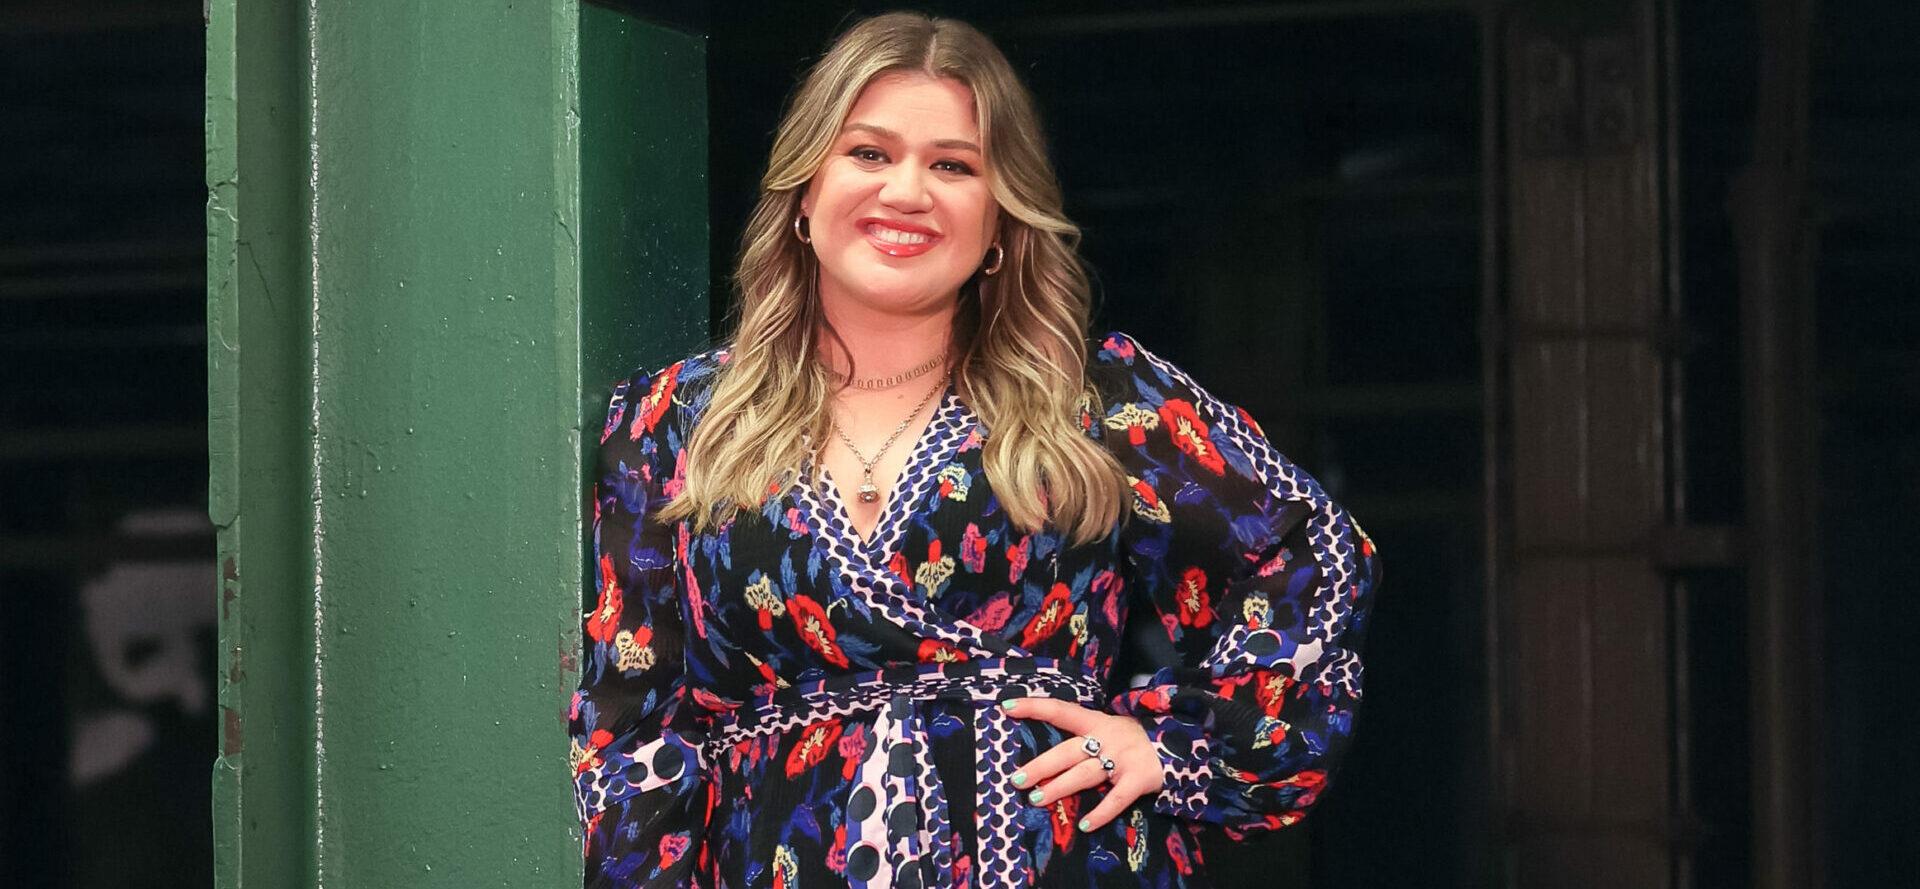 Kelly Clarkson Gets Permanent Restraining Orders Against TWO Alleged Stalkers